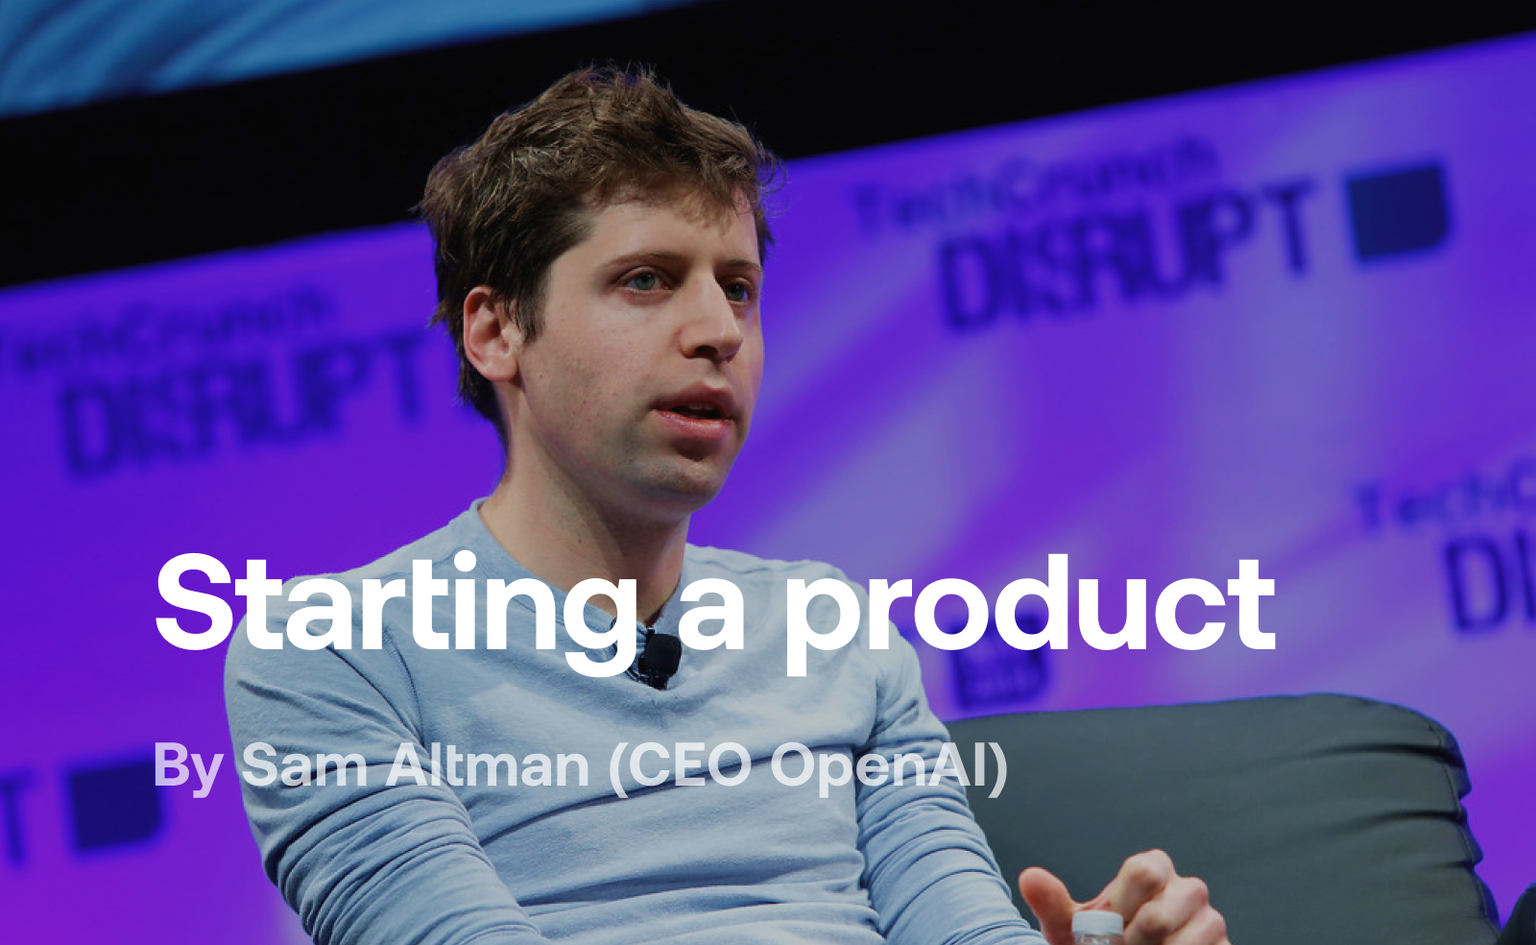 Starting a Product by Sam Altman